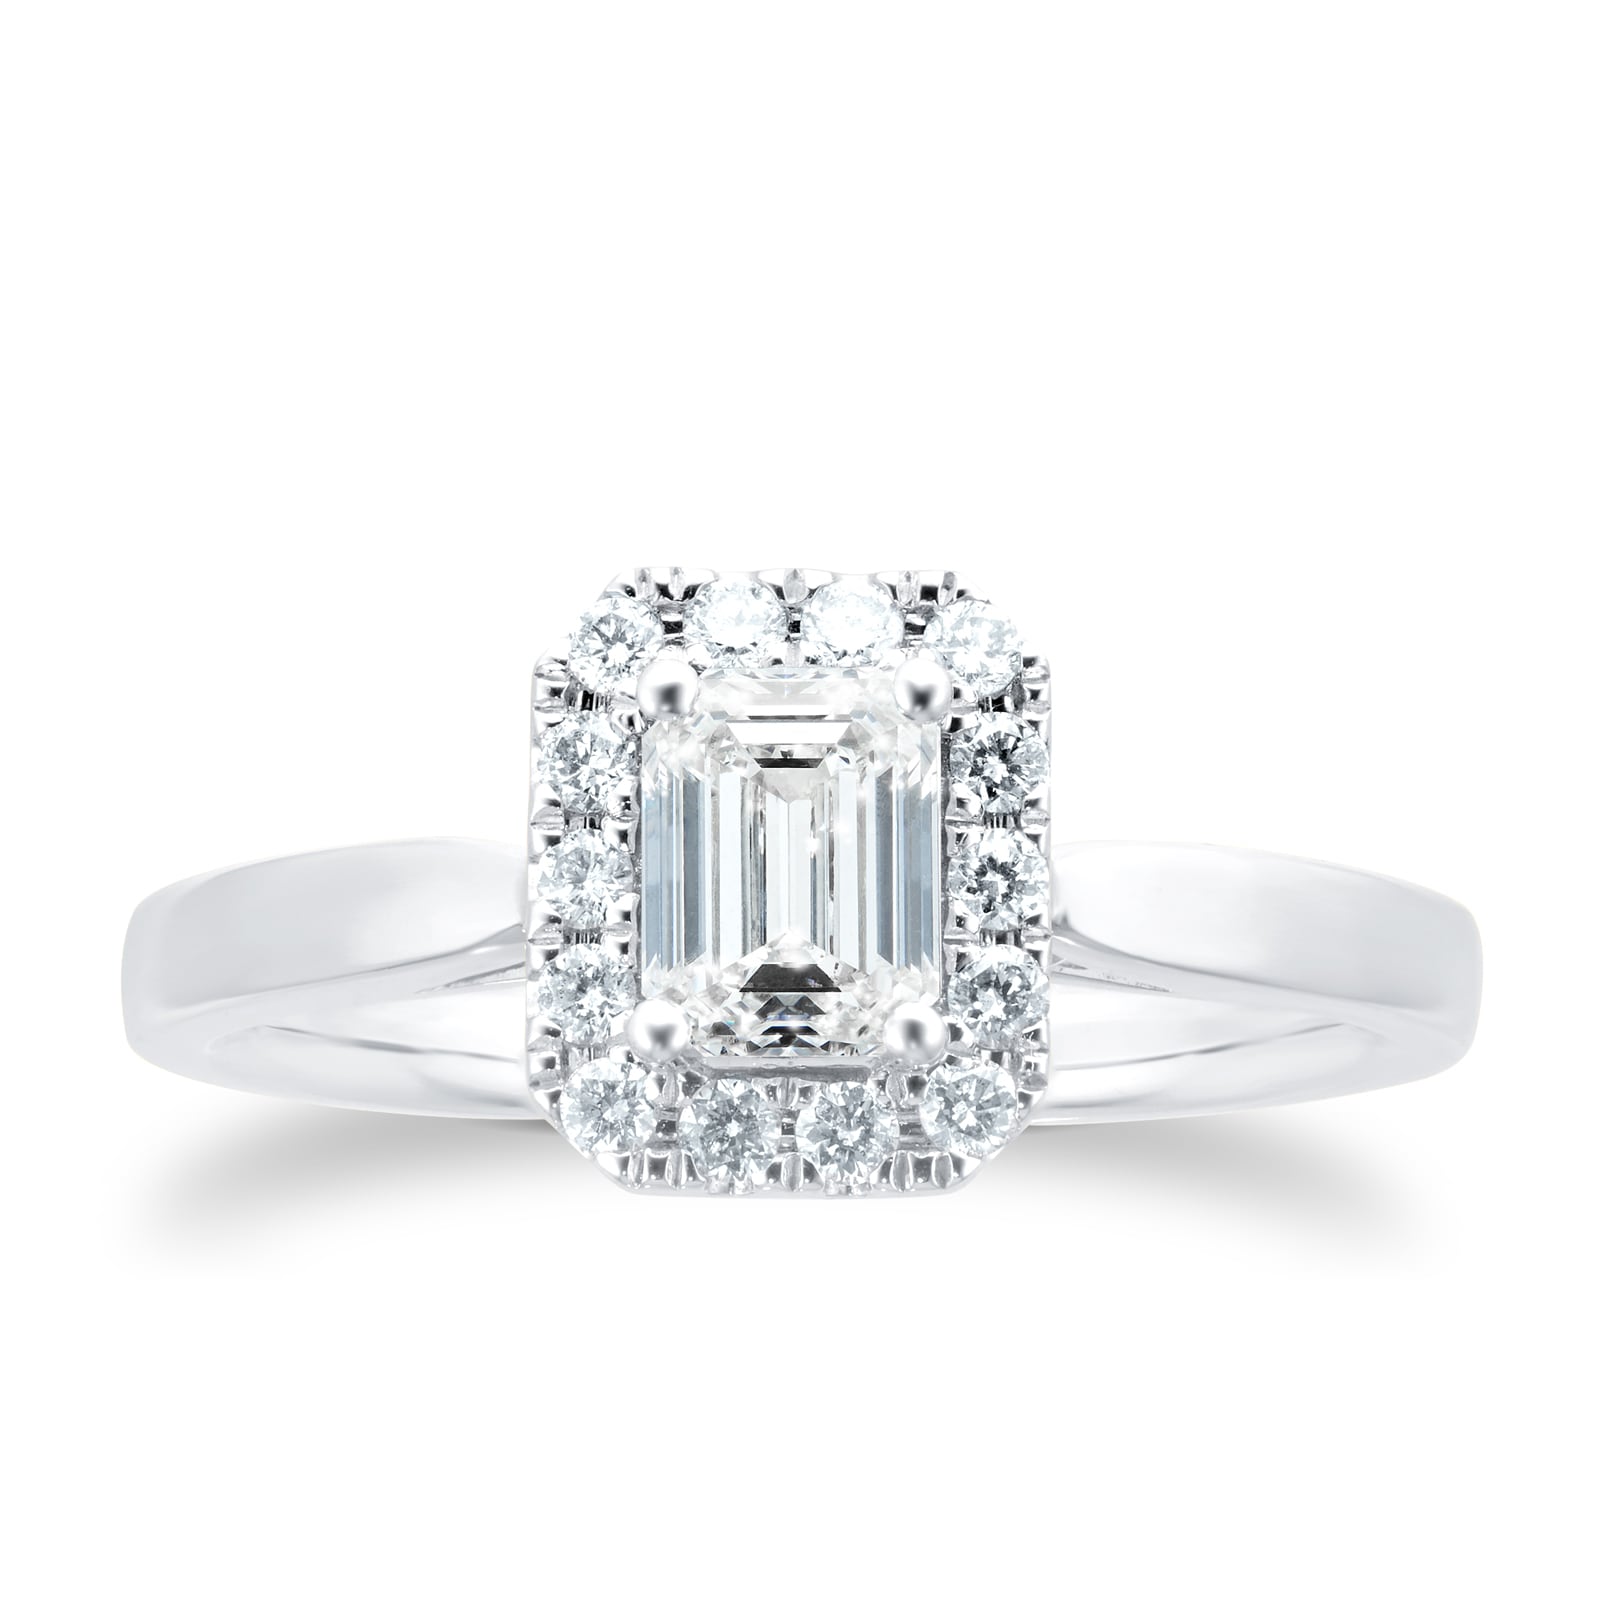 18ct White Gold 0.90cttw Diamond Emerald Cut Halo Ring - Ring Size L